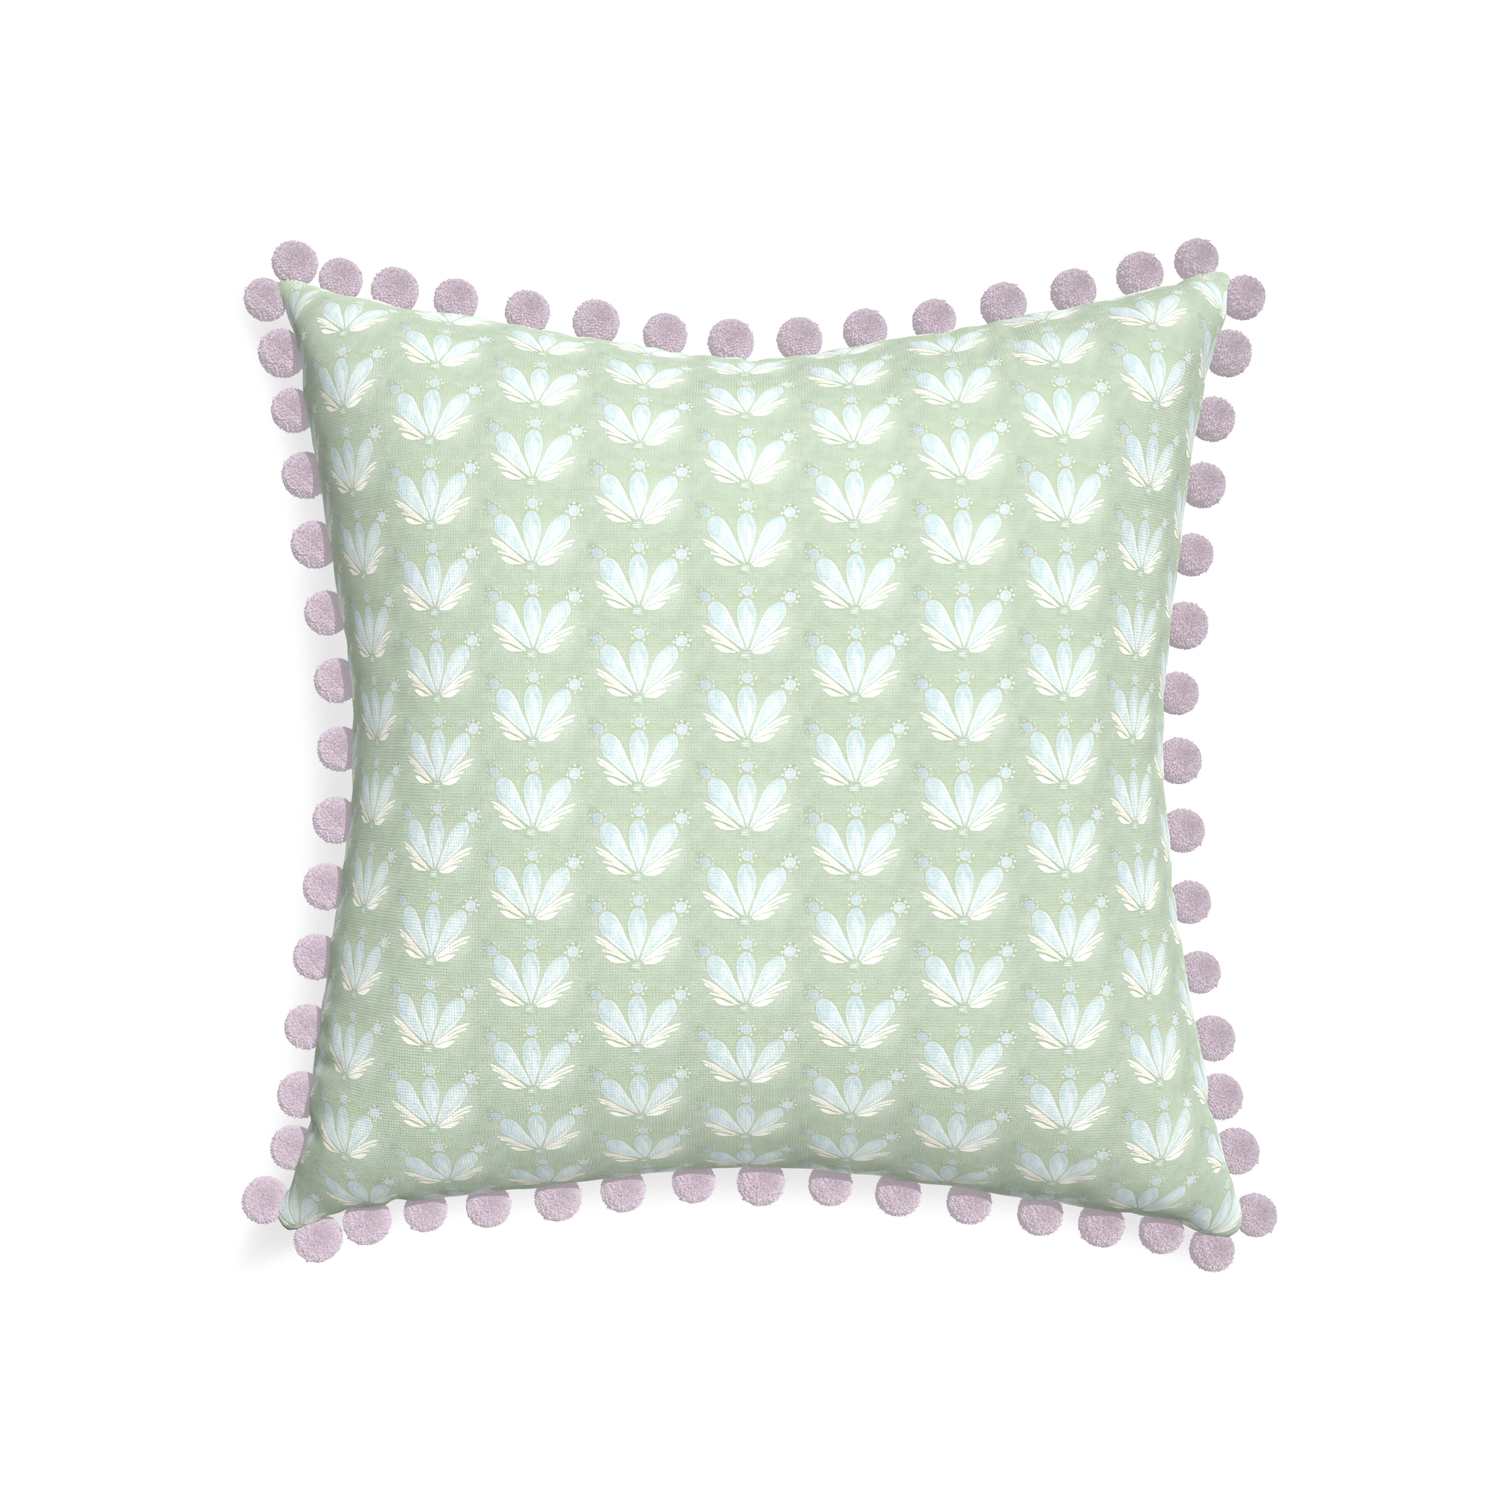 22-square serena sea salt custom blue & green floral drop repeatpillow with l on white background